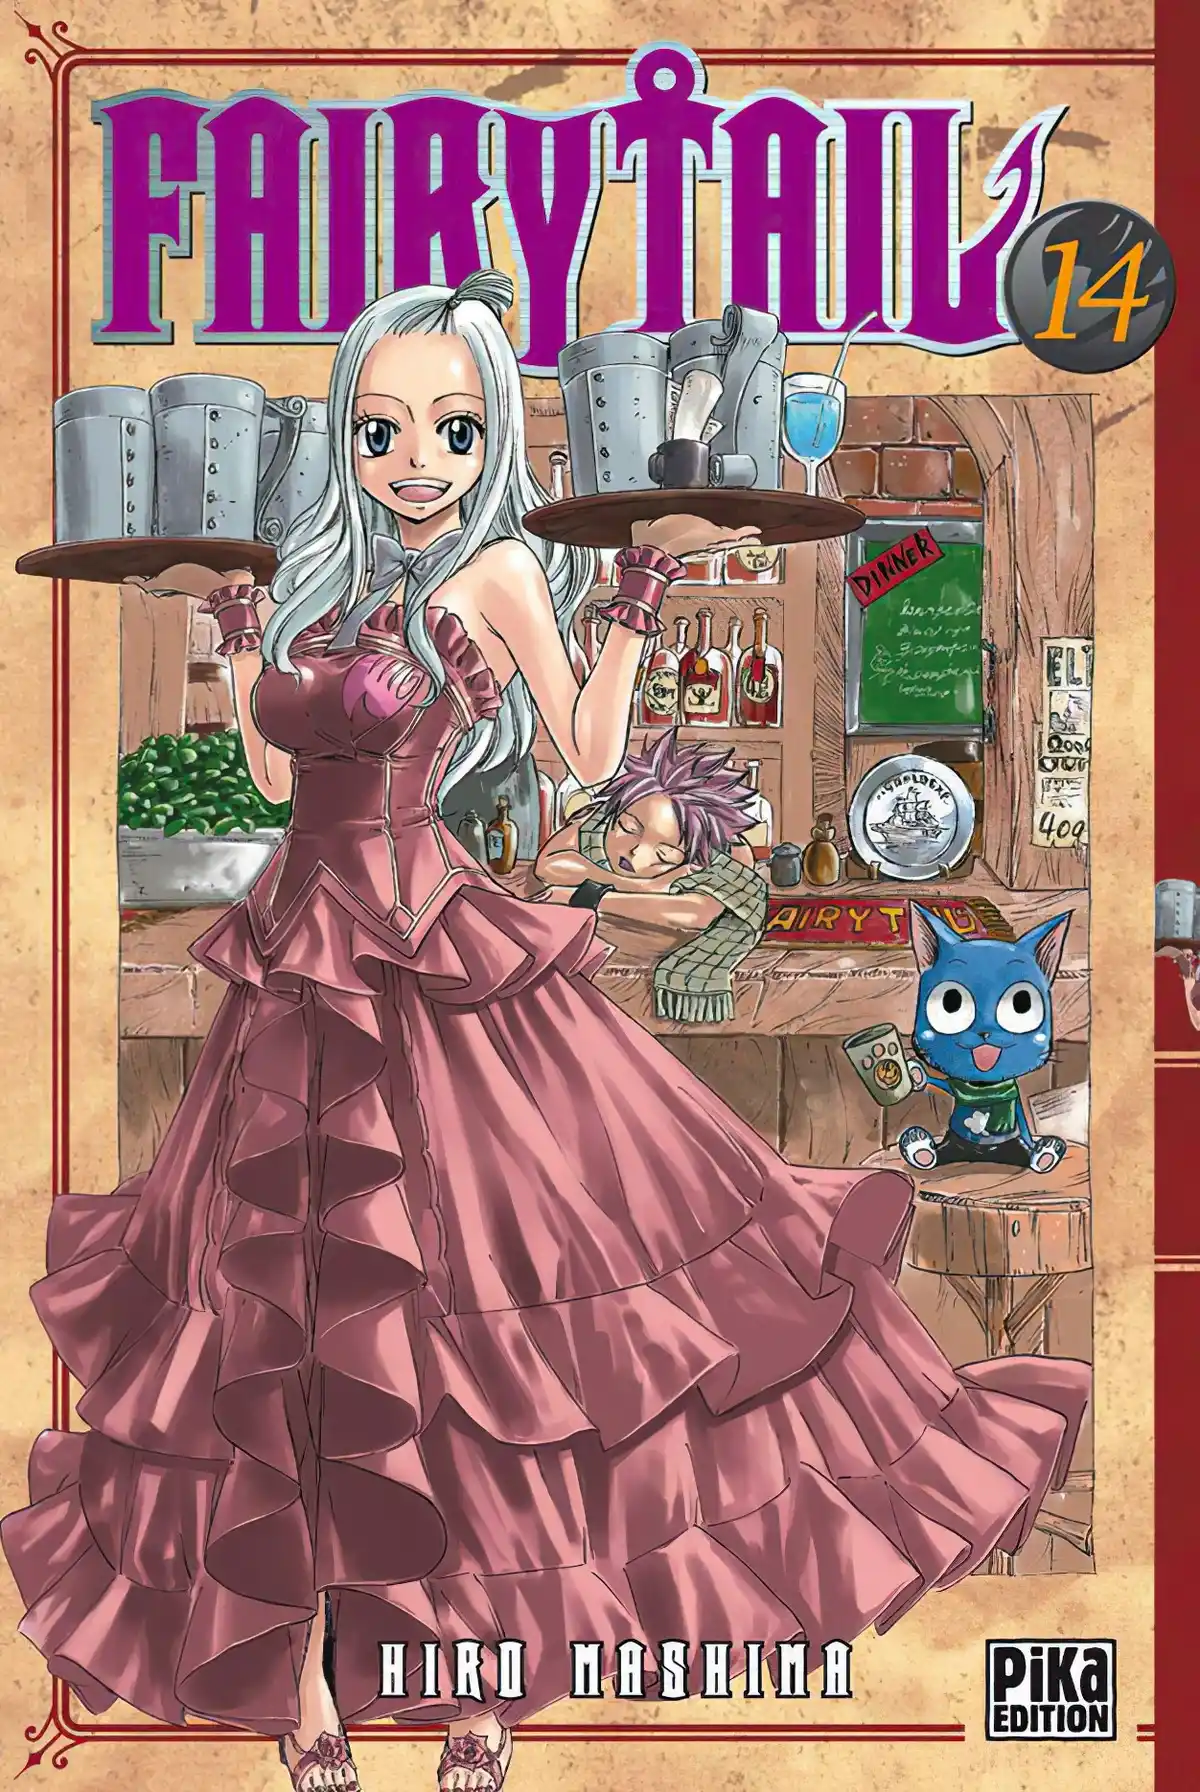 Fairy Tail Volume 14 page 1